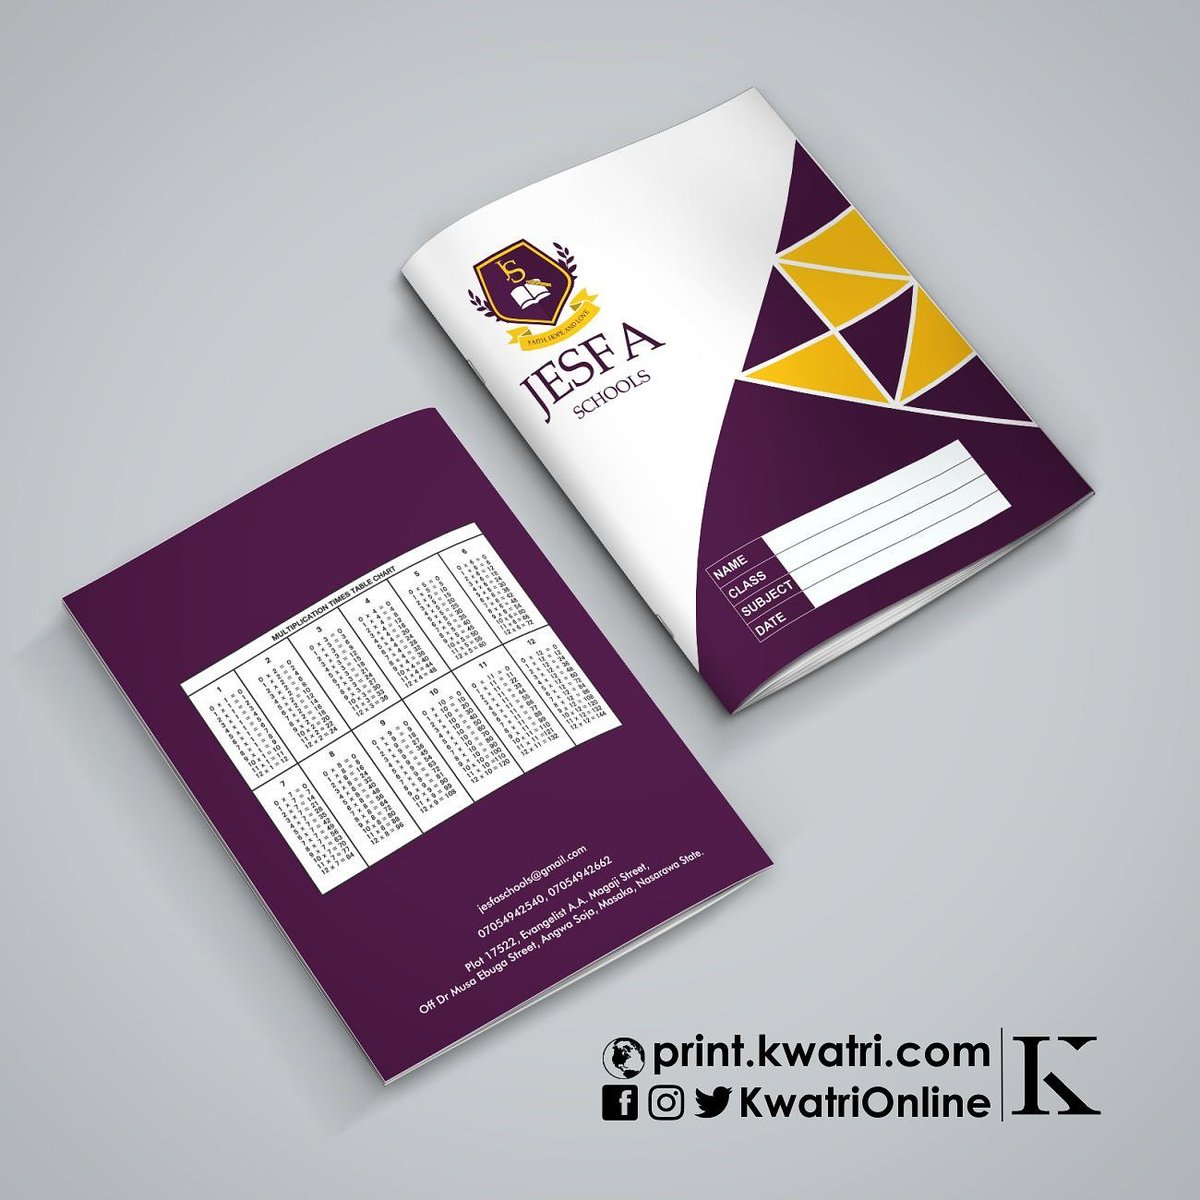 KWATRI on Twitter: "Exercise book design & print for Jesfa Schools by